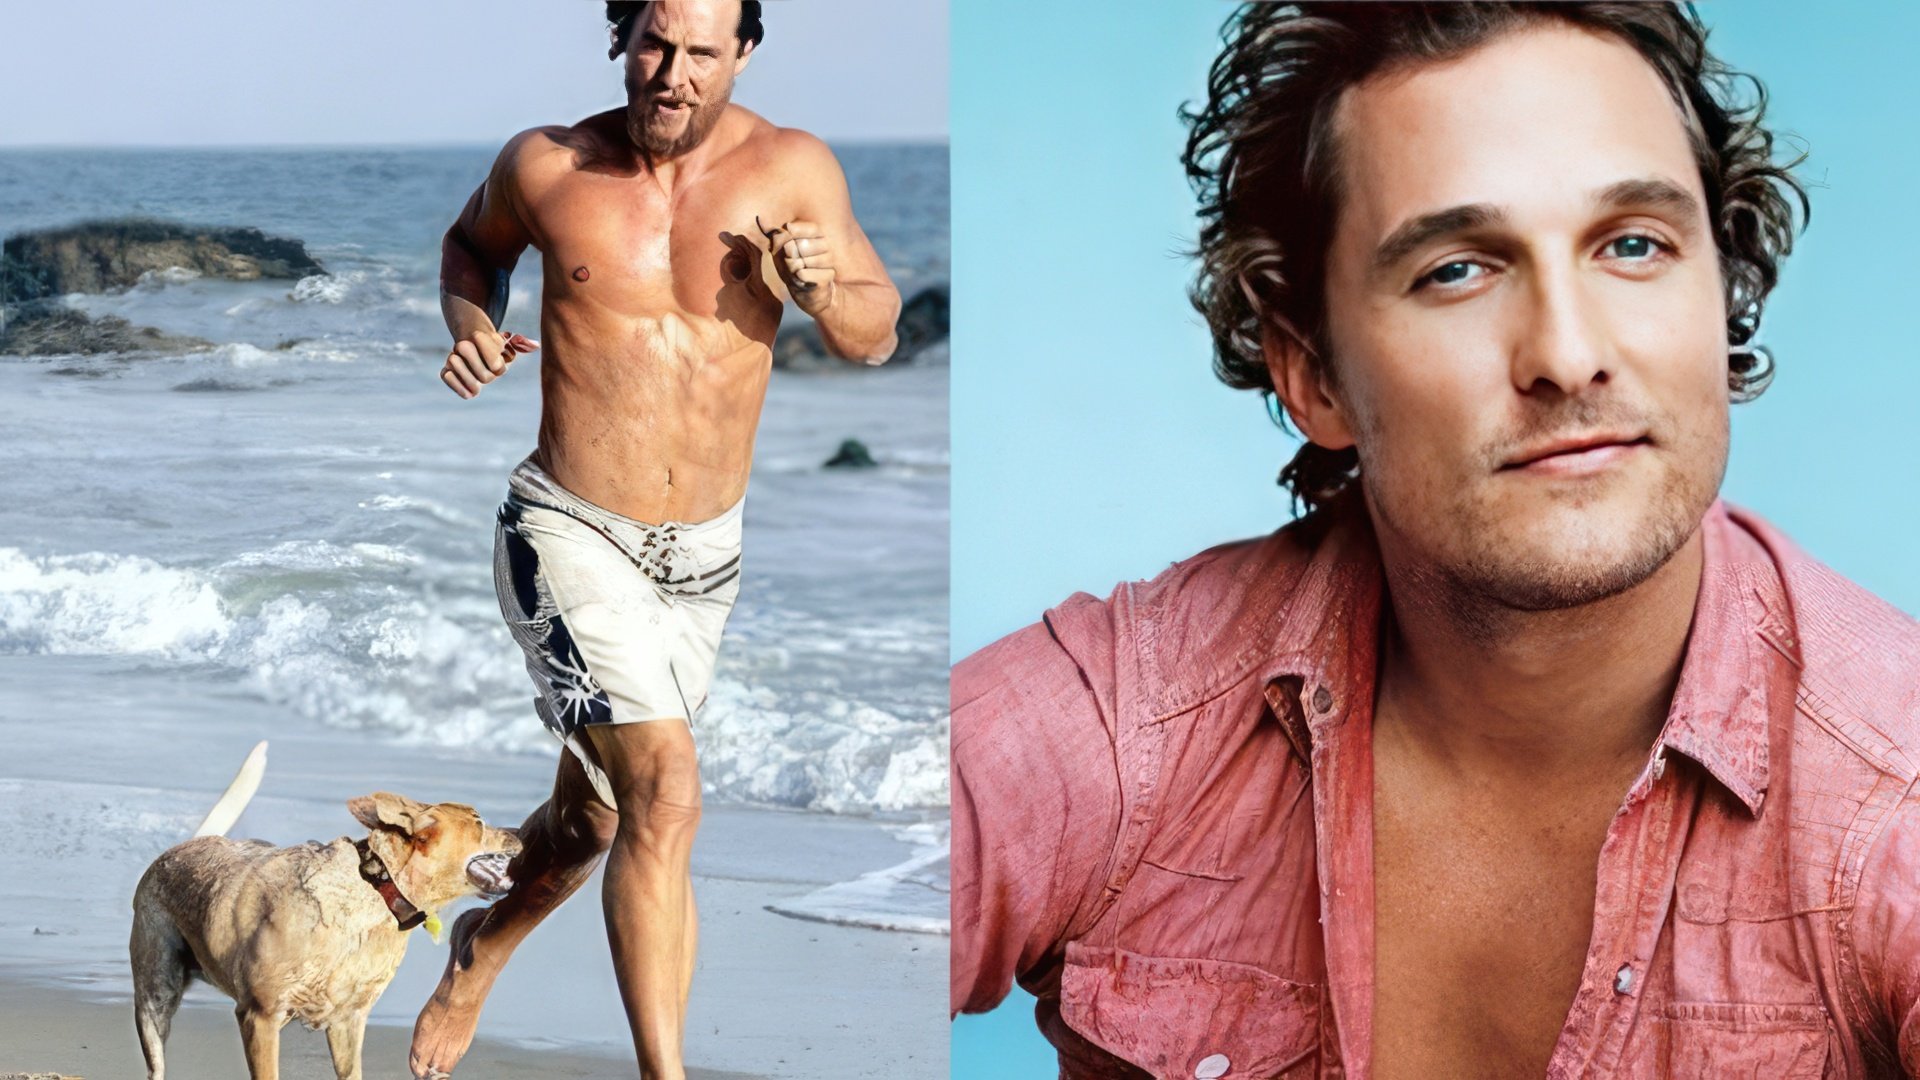 In young age McConaughey was a heartbreaker